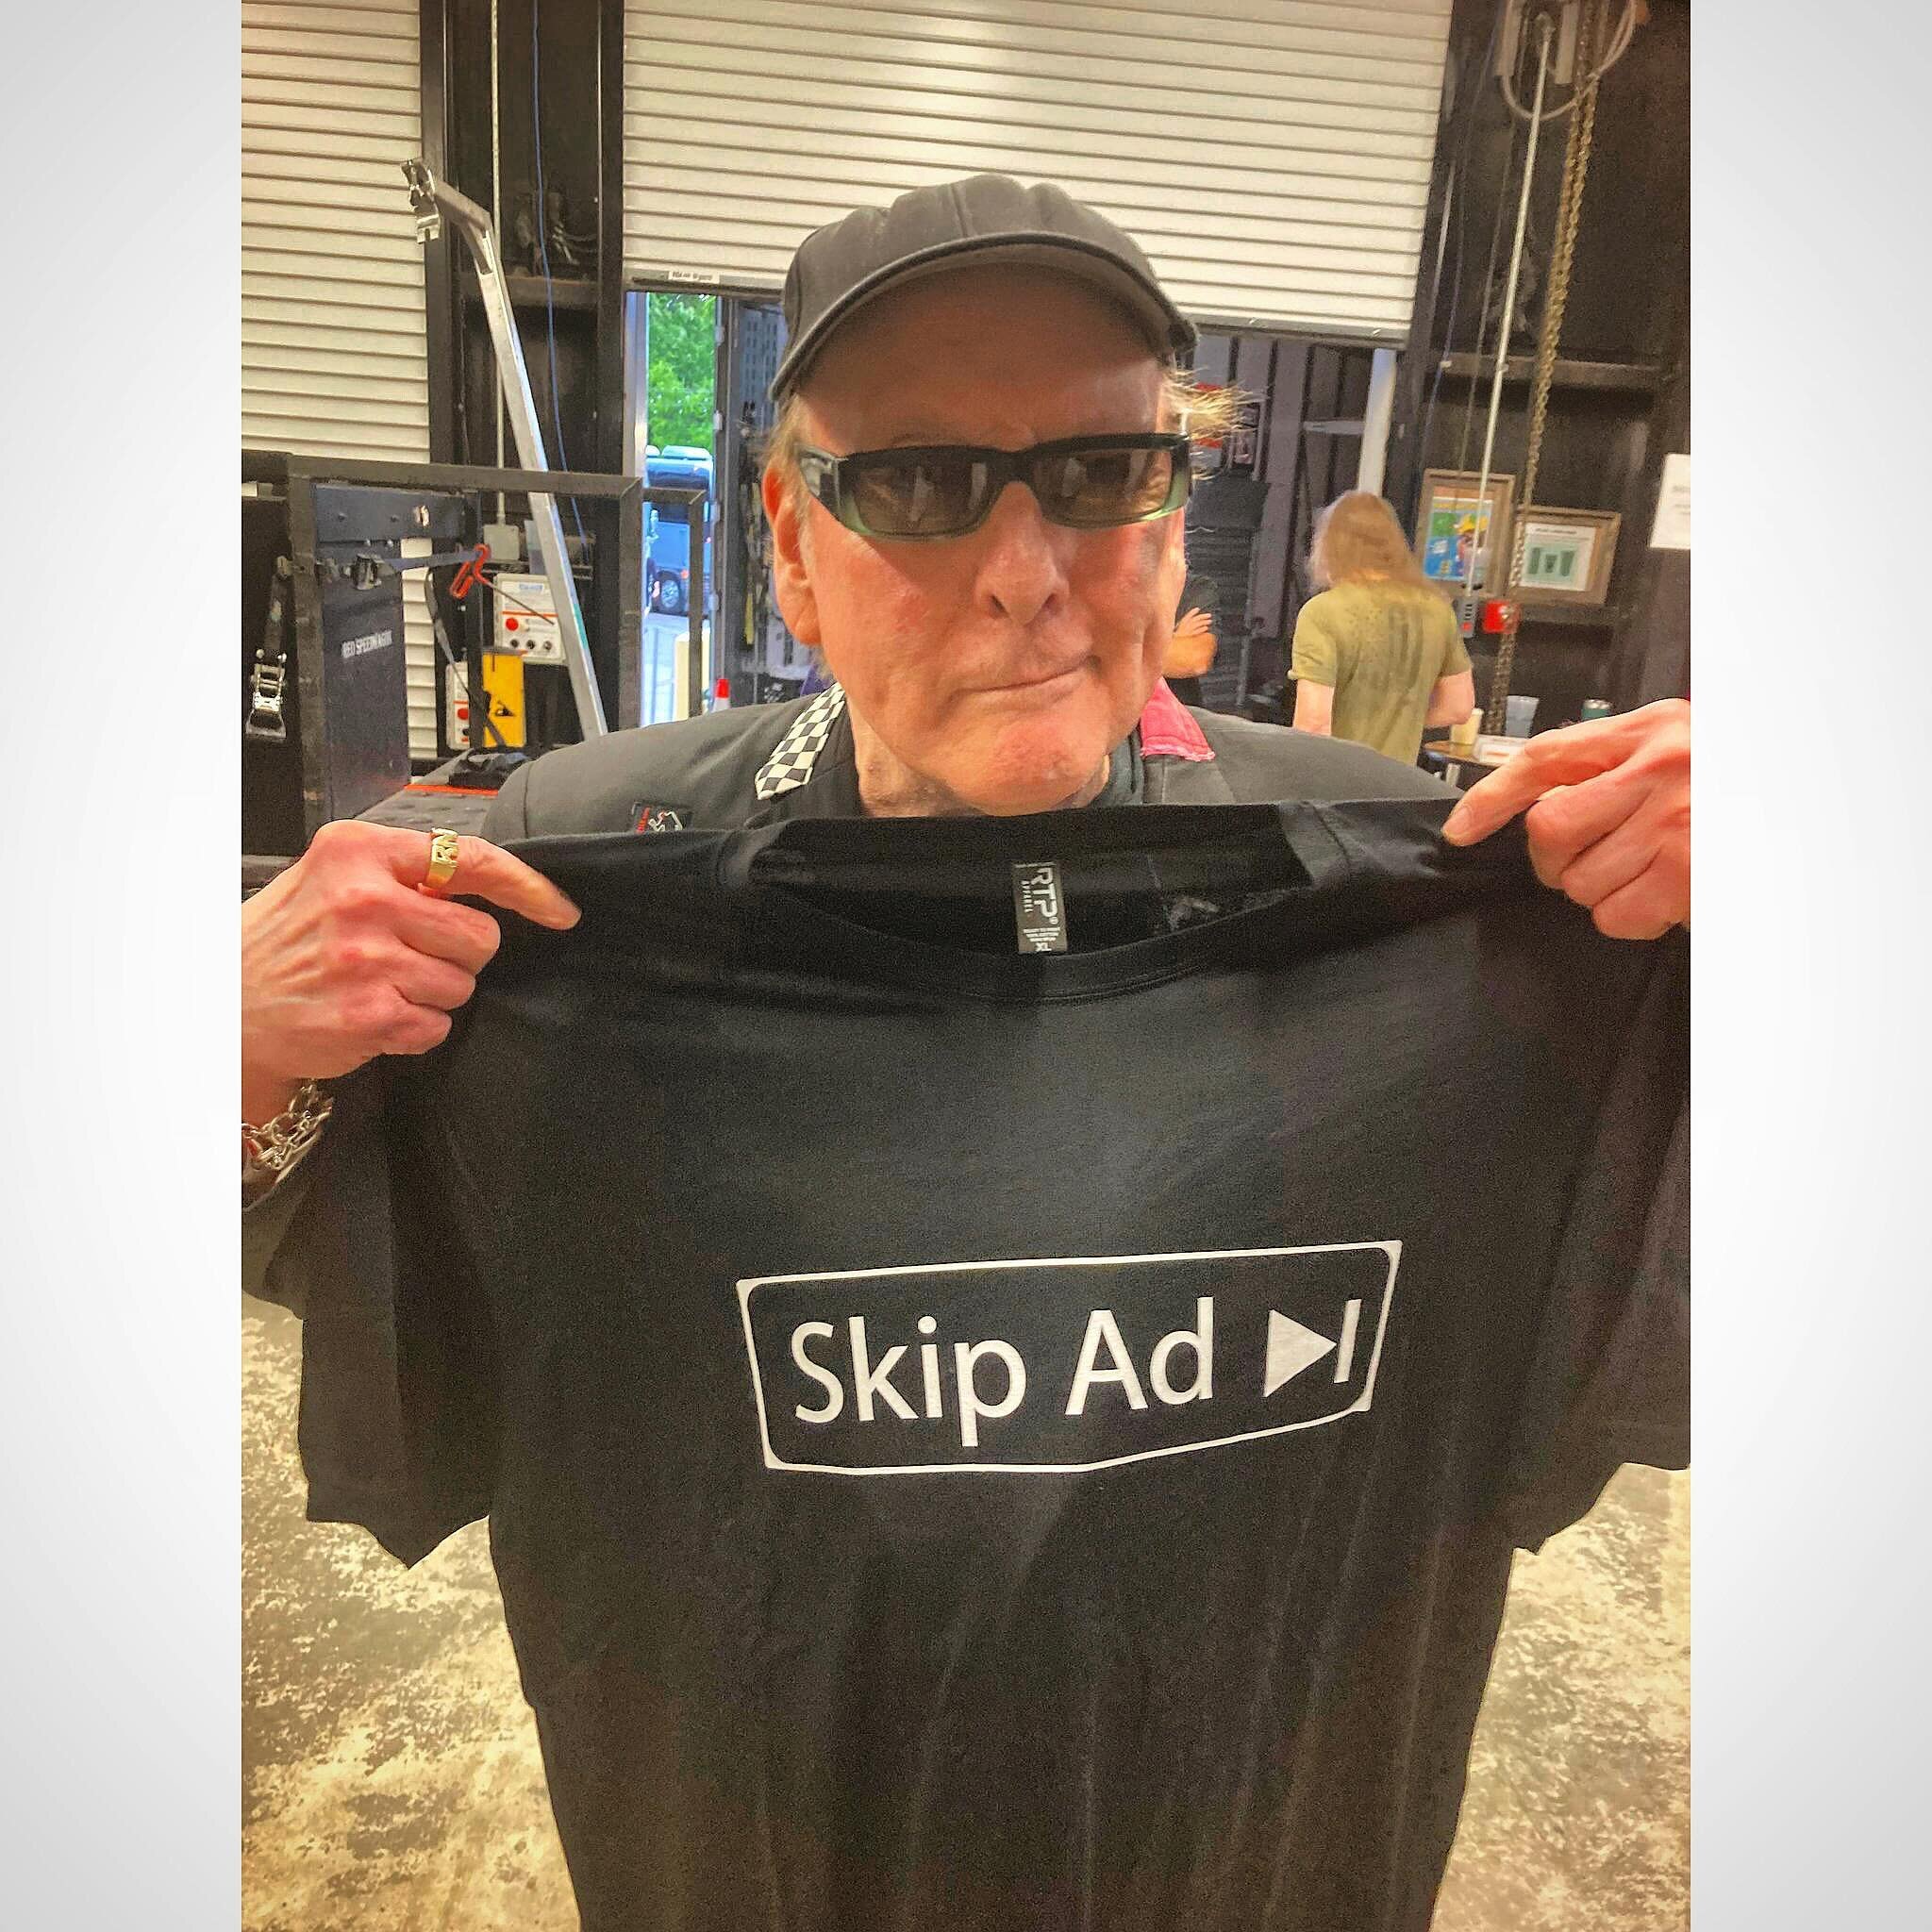 This is an Extraordinary Moment !
The Legendary Rick Nielsen @cheaptrickrick @cheaptrick about to rock the Skip Ad tee !
.
Thanks to the extraordinary coffee boss @jeffo711 for making this happen. Unbelievable.  Totally stoked ! 
.
Shop link in bio